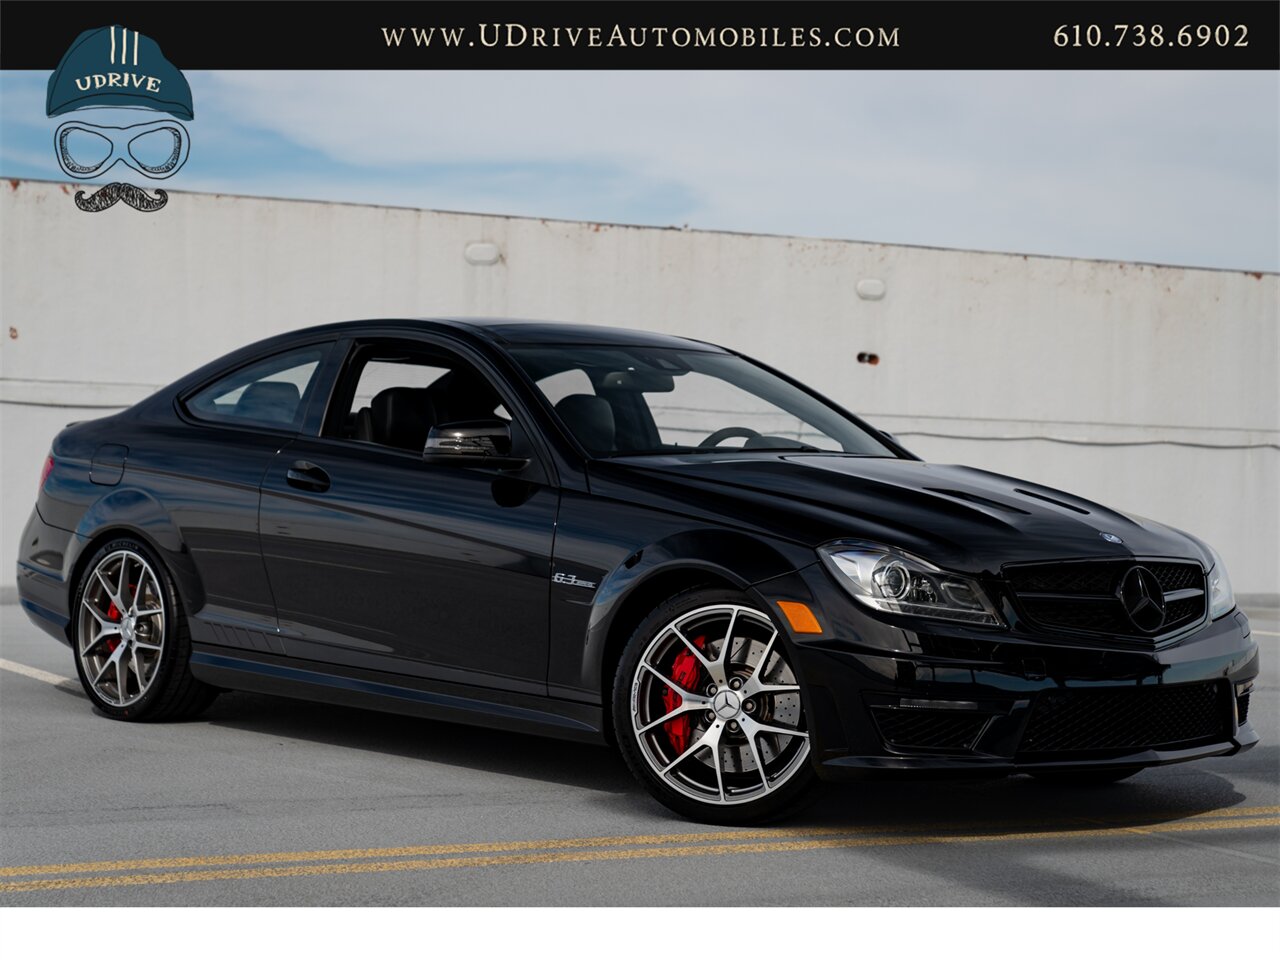 2015 Mercedes-Benz C63 AMG  Edition 507 17k Miles Pano Sunroof Locking Diff 507hp - Photo 3 - West Chester, PA 19382